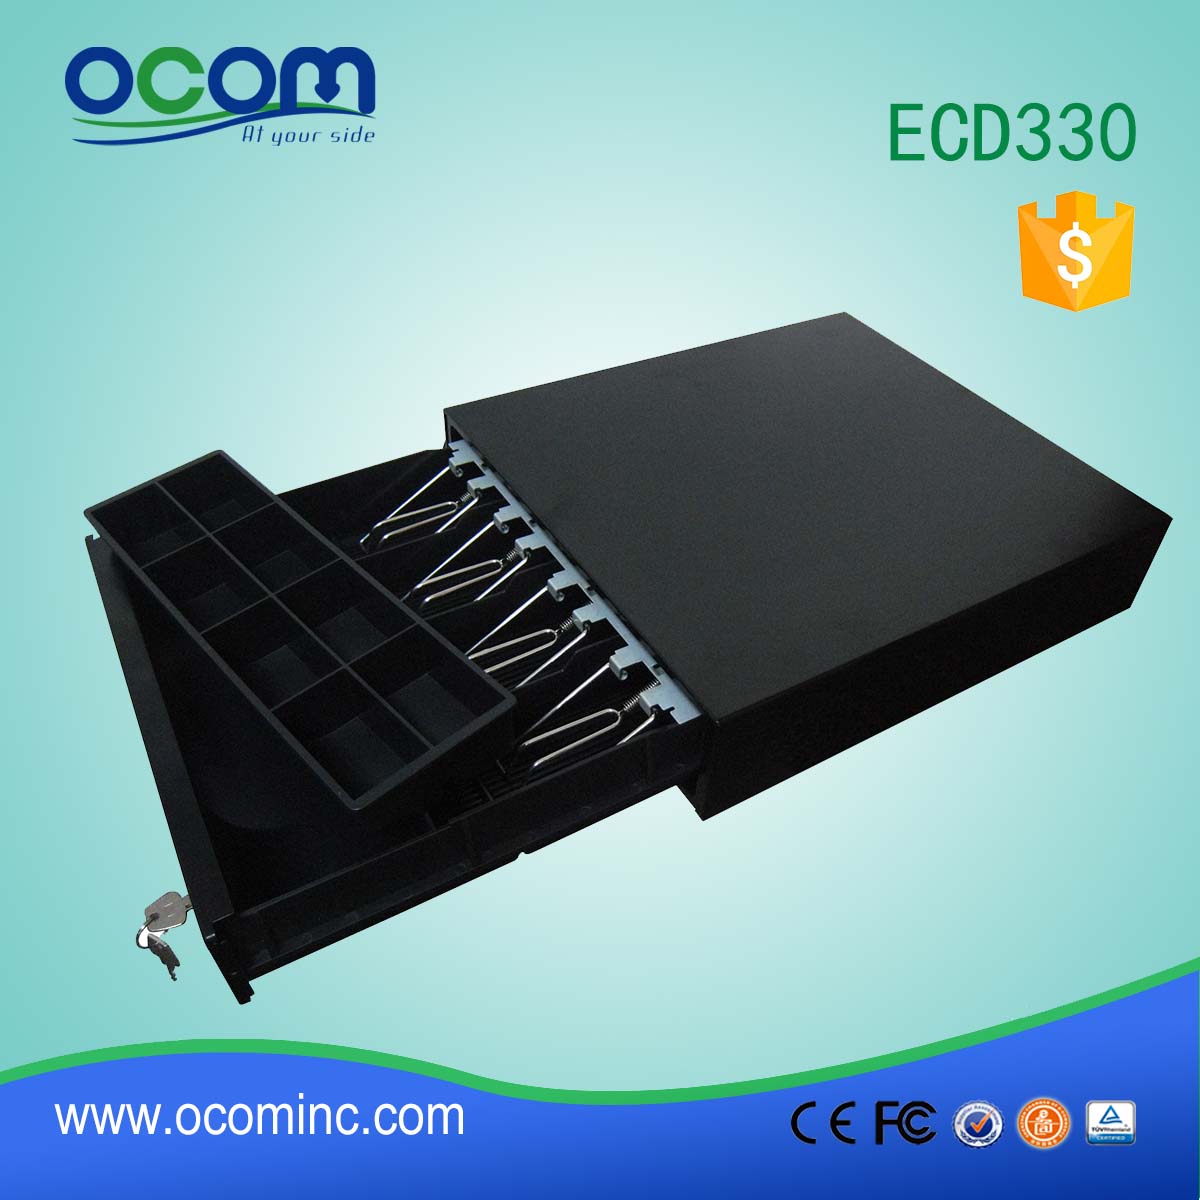 China pos cash drawer rj11 with 8 coin slots (ECD330C)